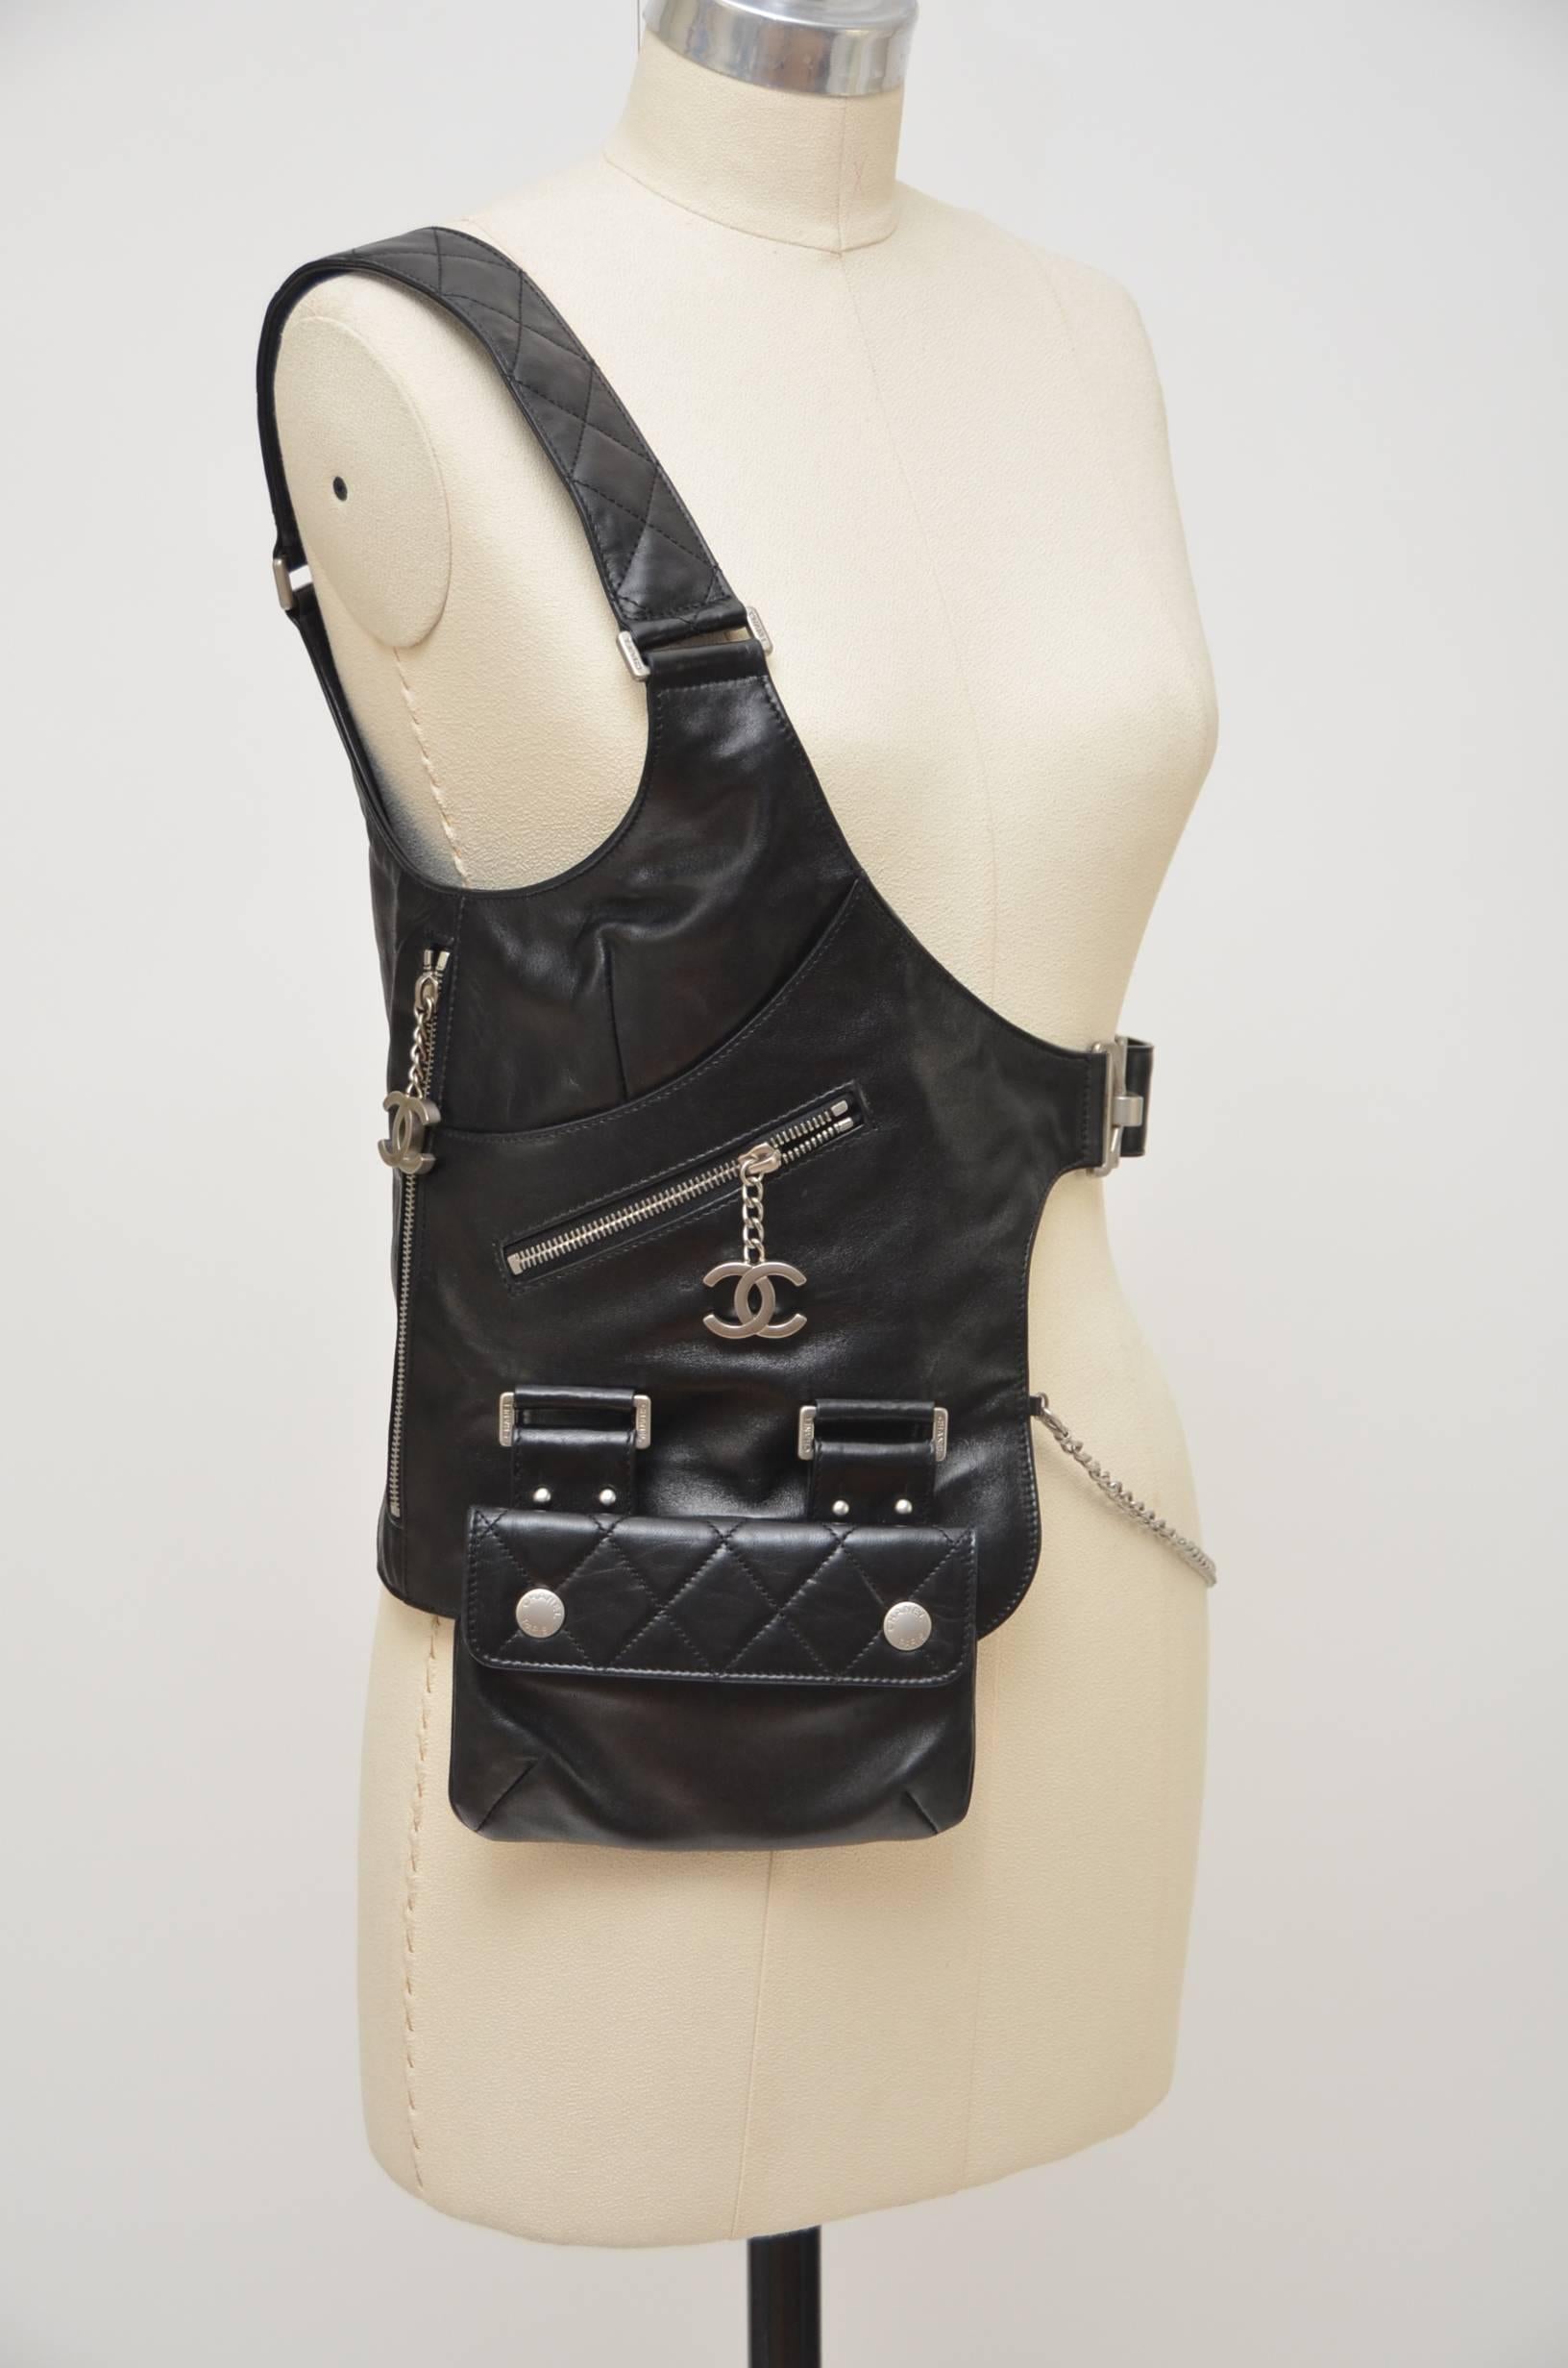 Chanel runway fall 2003 lambskin harness vest.
Very stylish and must have for Chanel collector.Worn under Chanel tweed jackets on the runway but this beautiful versatile  piece can be worn with pretty much anything....over dress , with jeans or